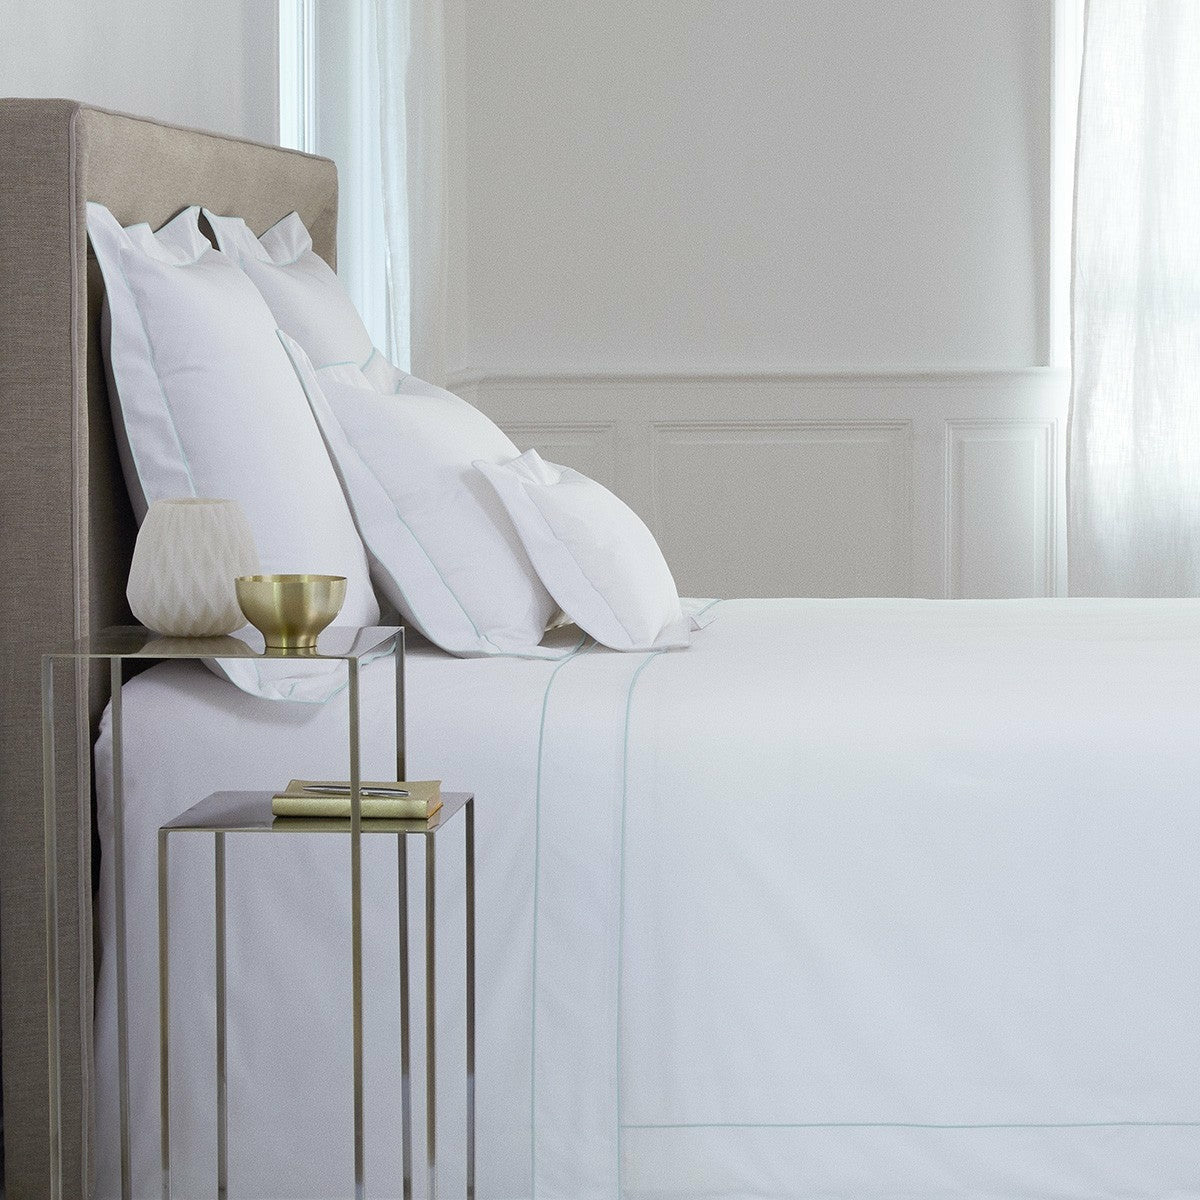 Yves Delorme Flandre Bedding Ambiance Blanc Fine Linens